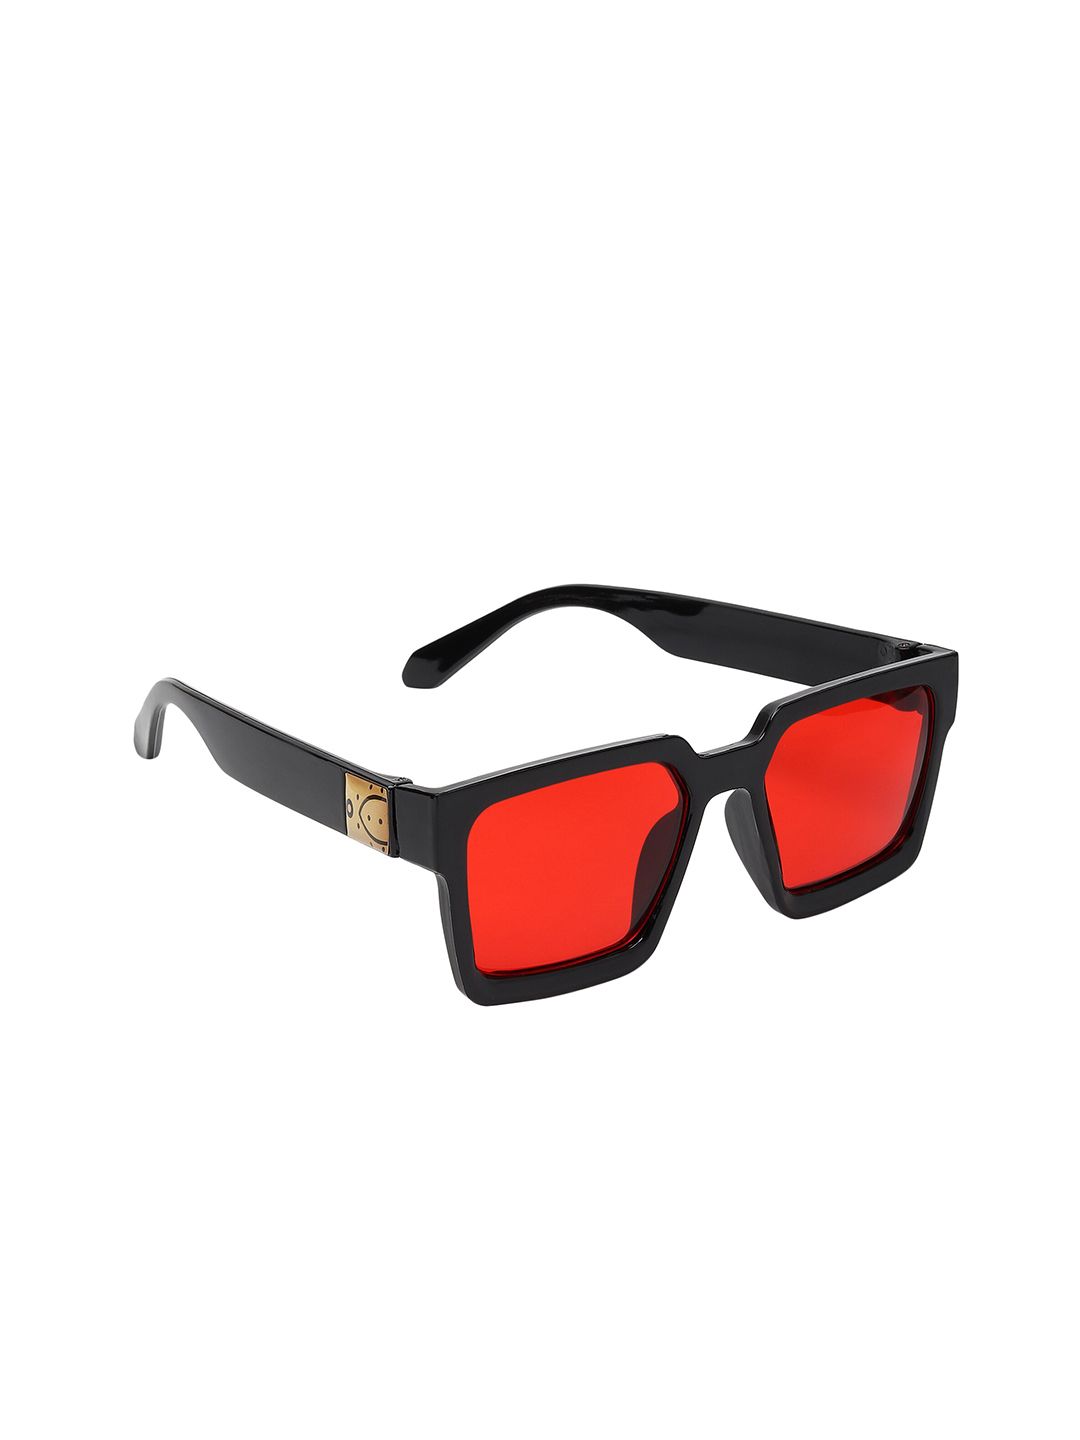 CRIBA Unisex Red Lens & Black Square Sunglasses with UV Protected Lens Price in India